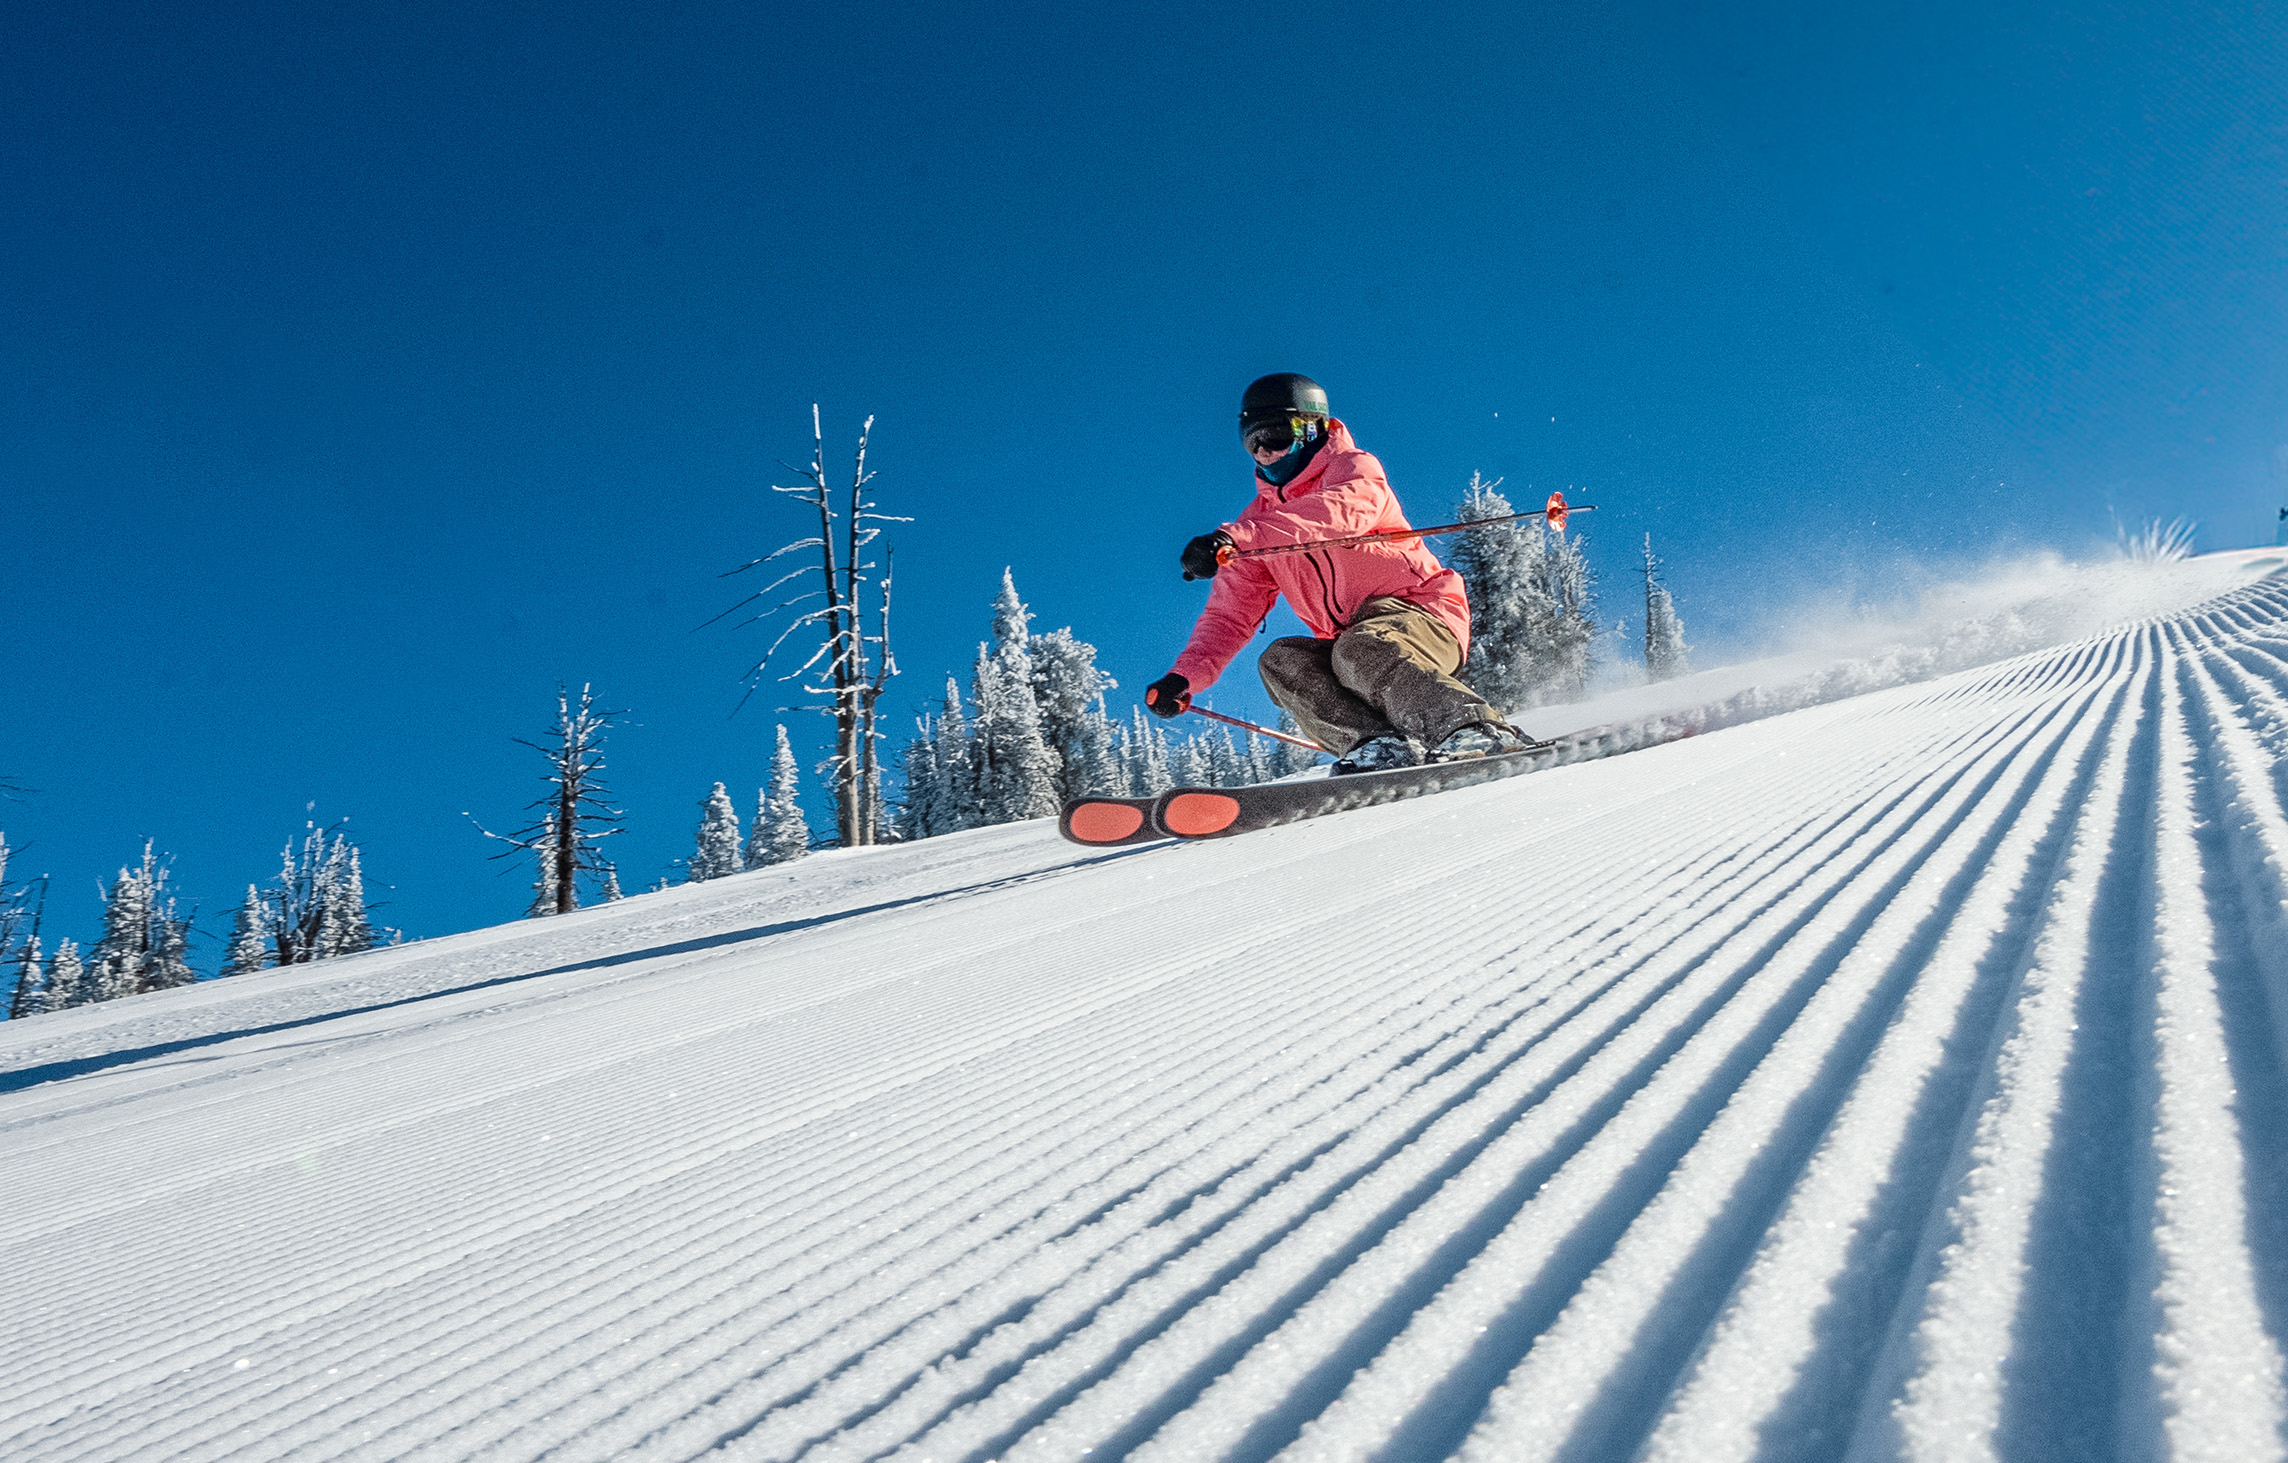 Brundage Mountain’s Early Season Pass Sale Offers Free Skiing Starting March 22